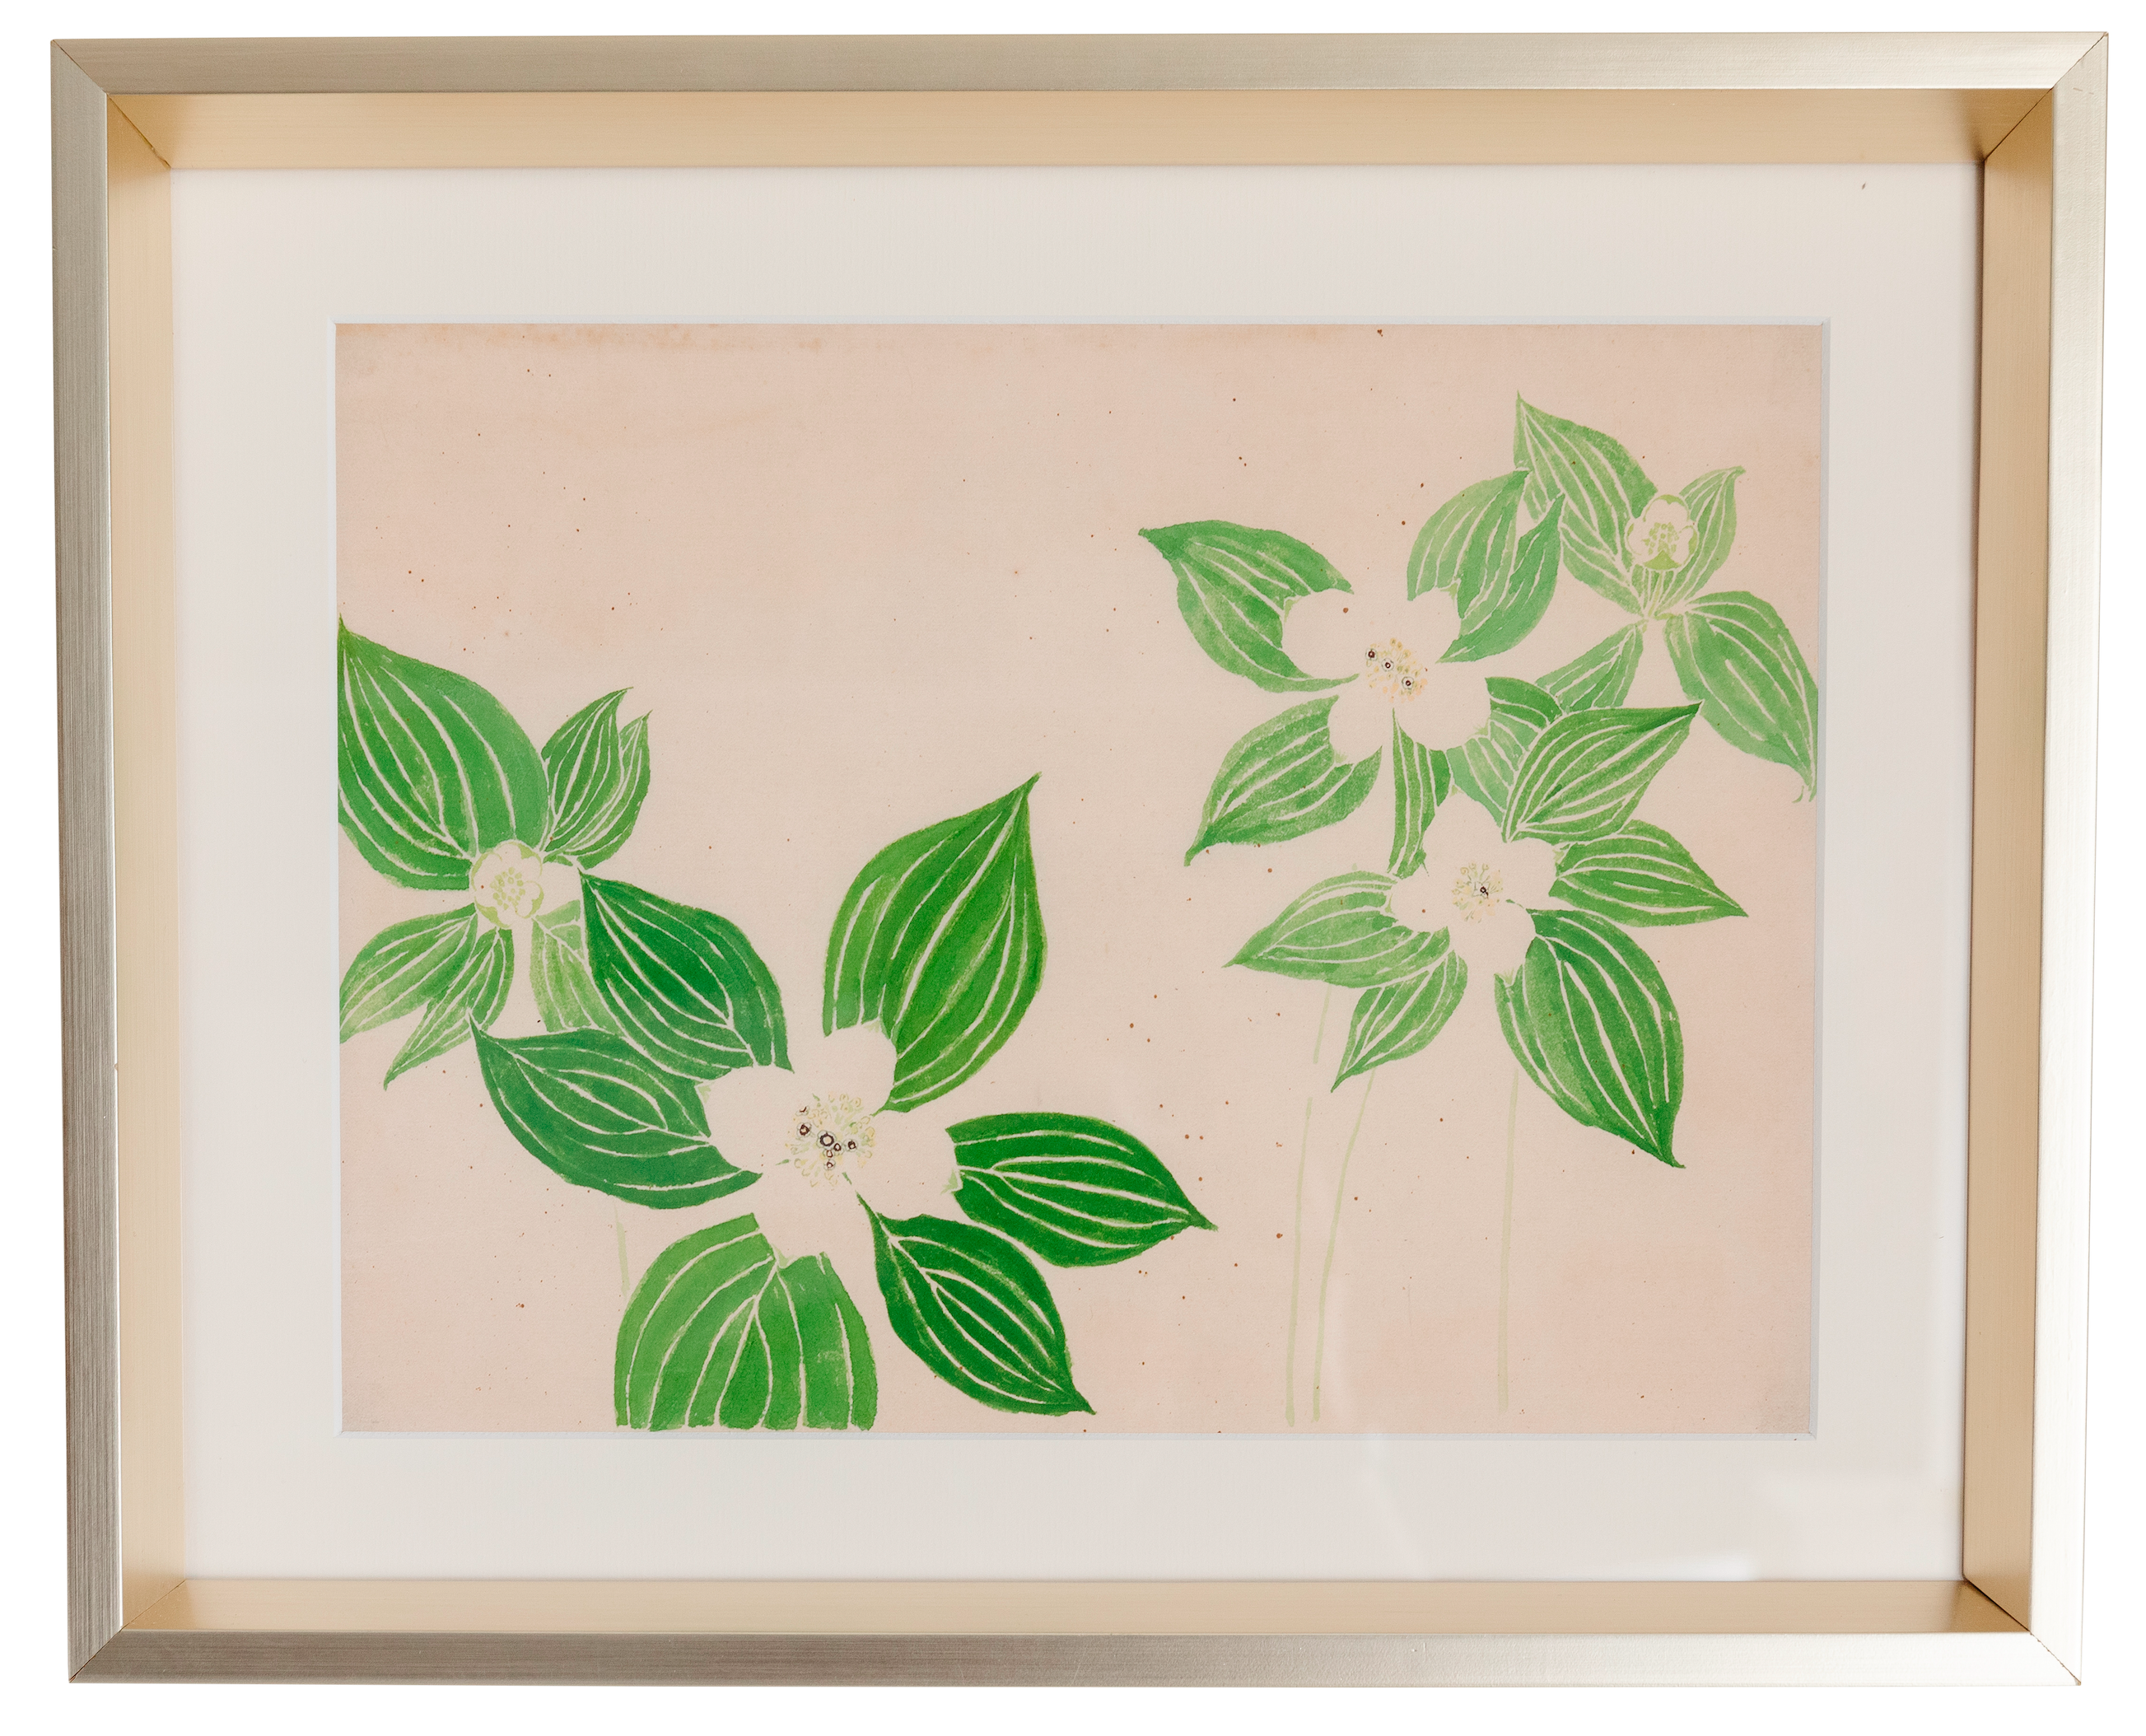 Botanical Giclee Prints on Hahnemuhle Paper Newly Matted and Framed